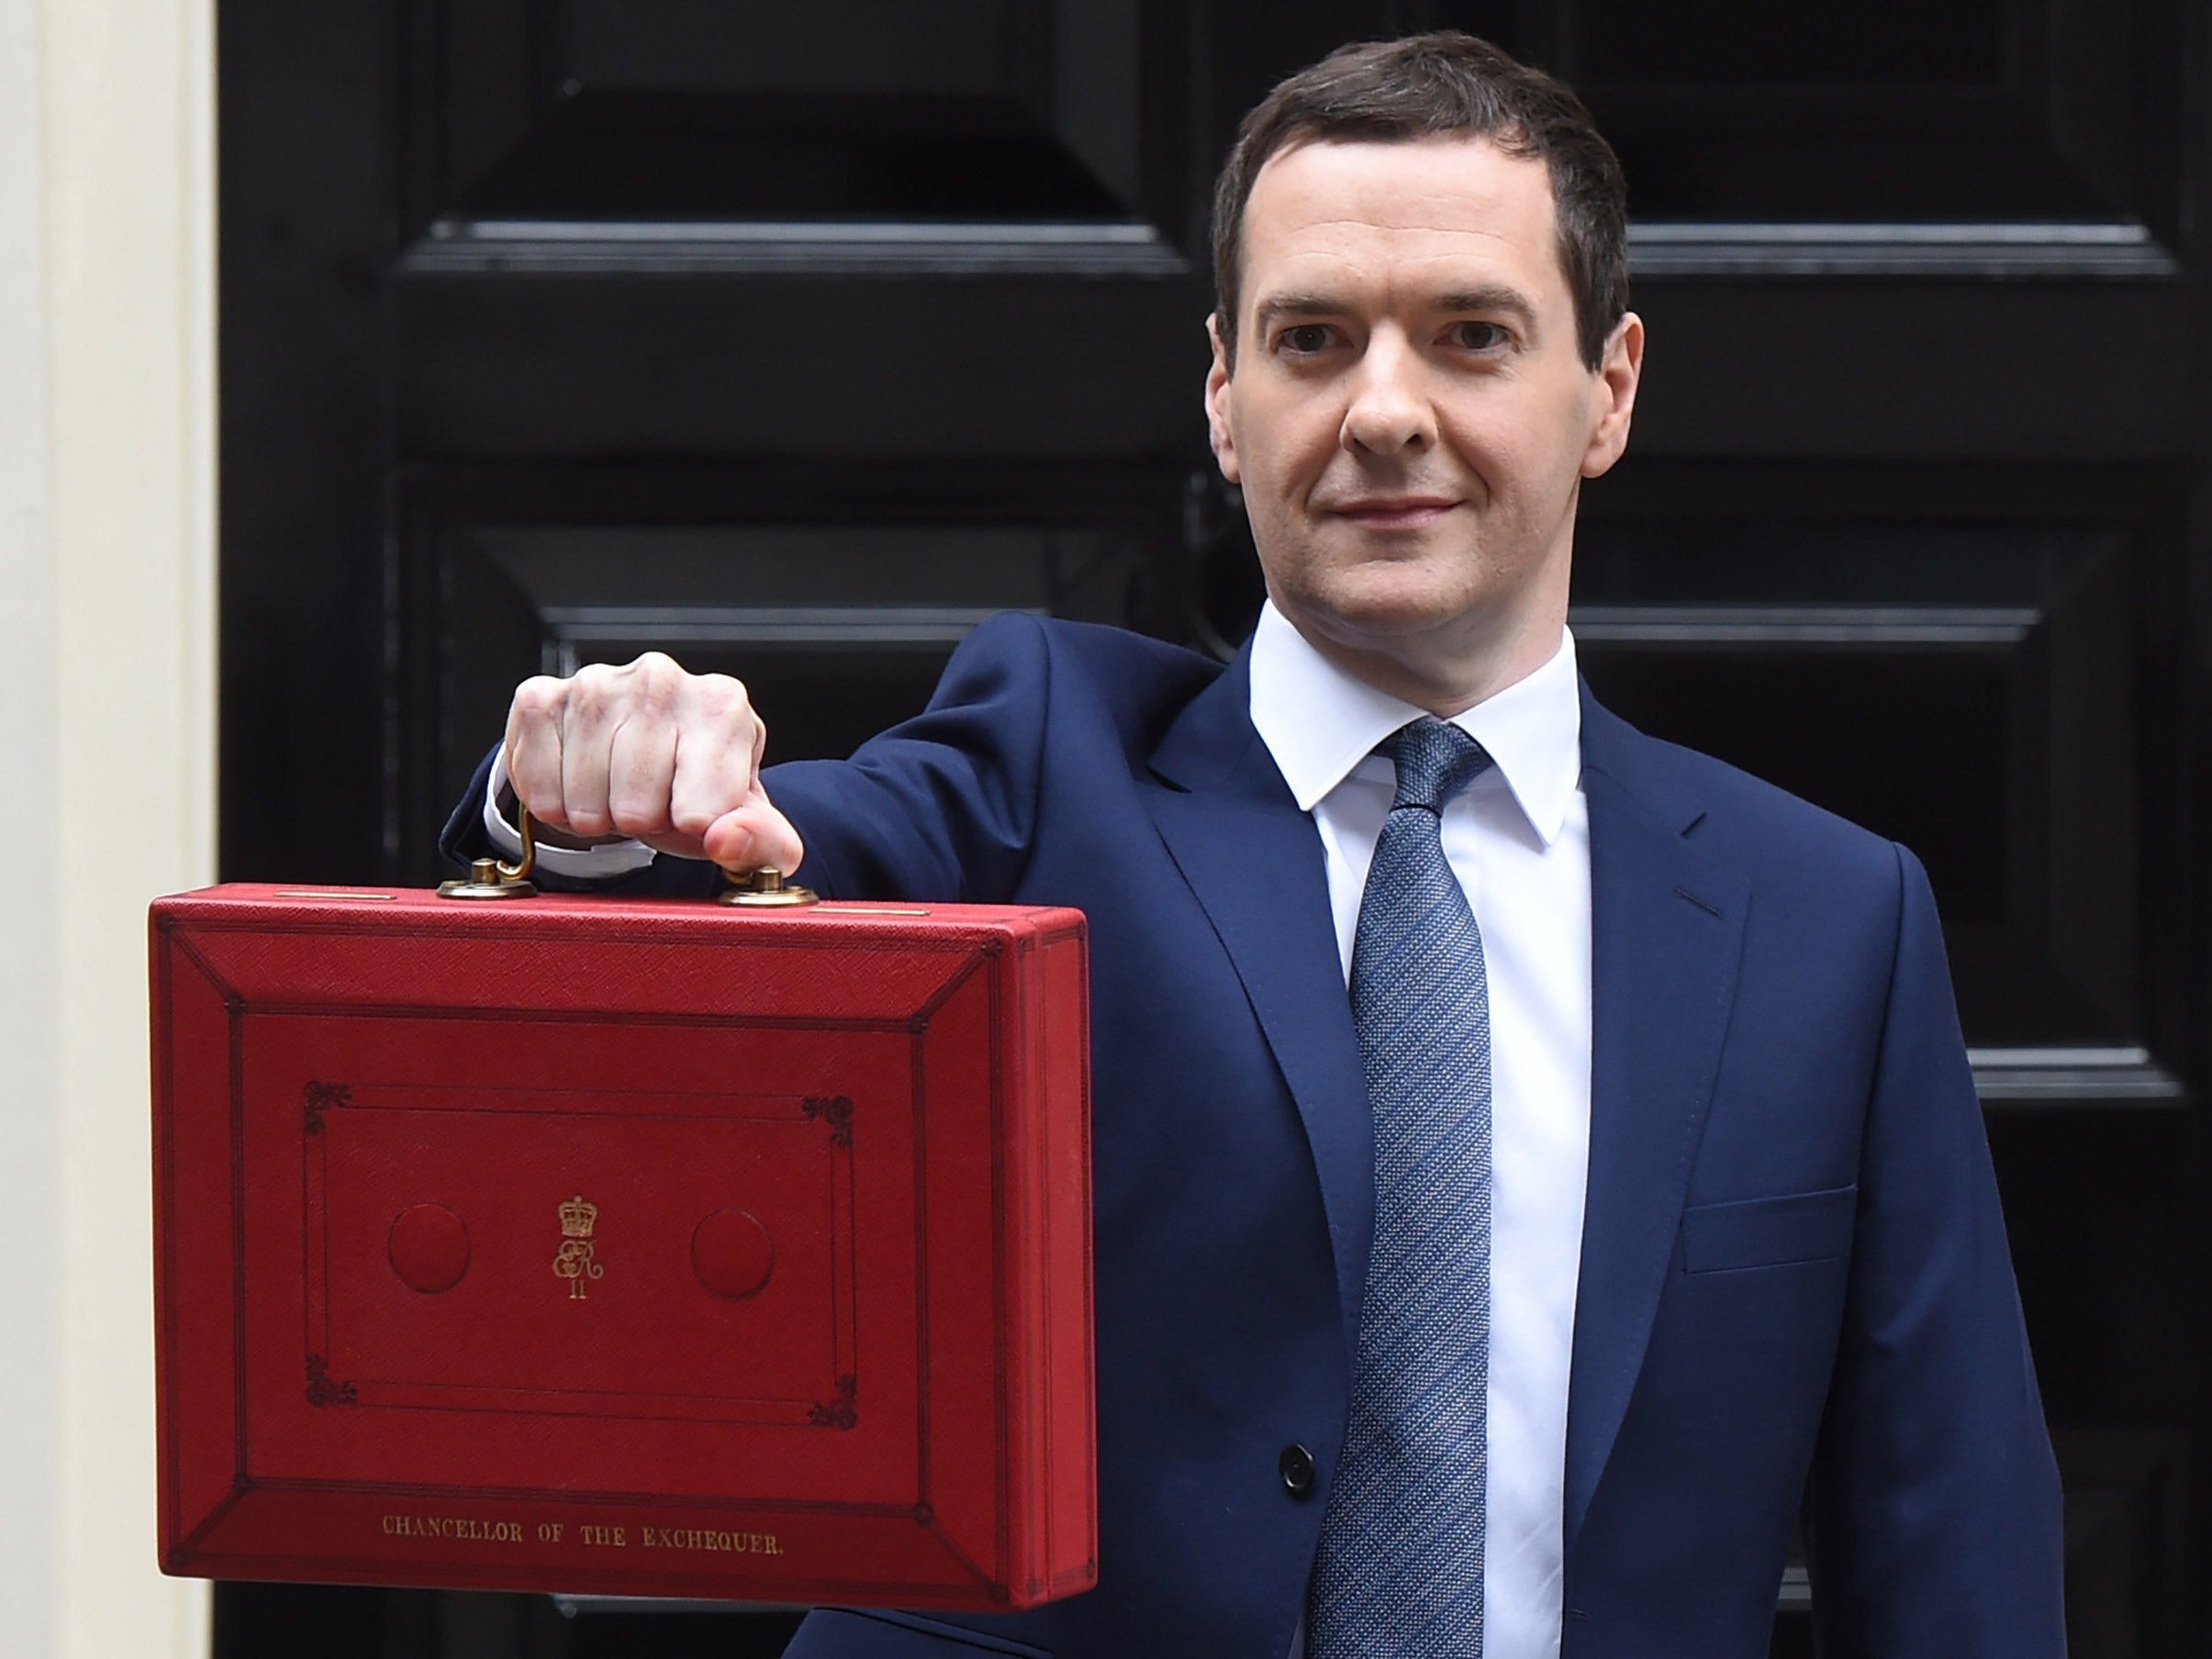 George Osborne has delivered his eighth Budget statement